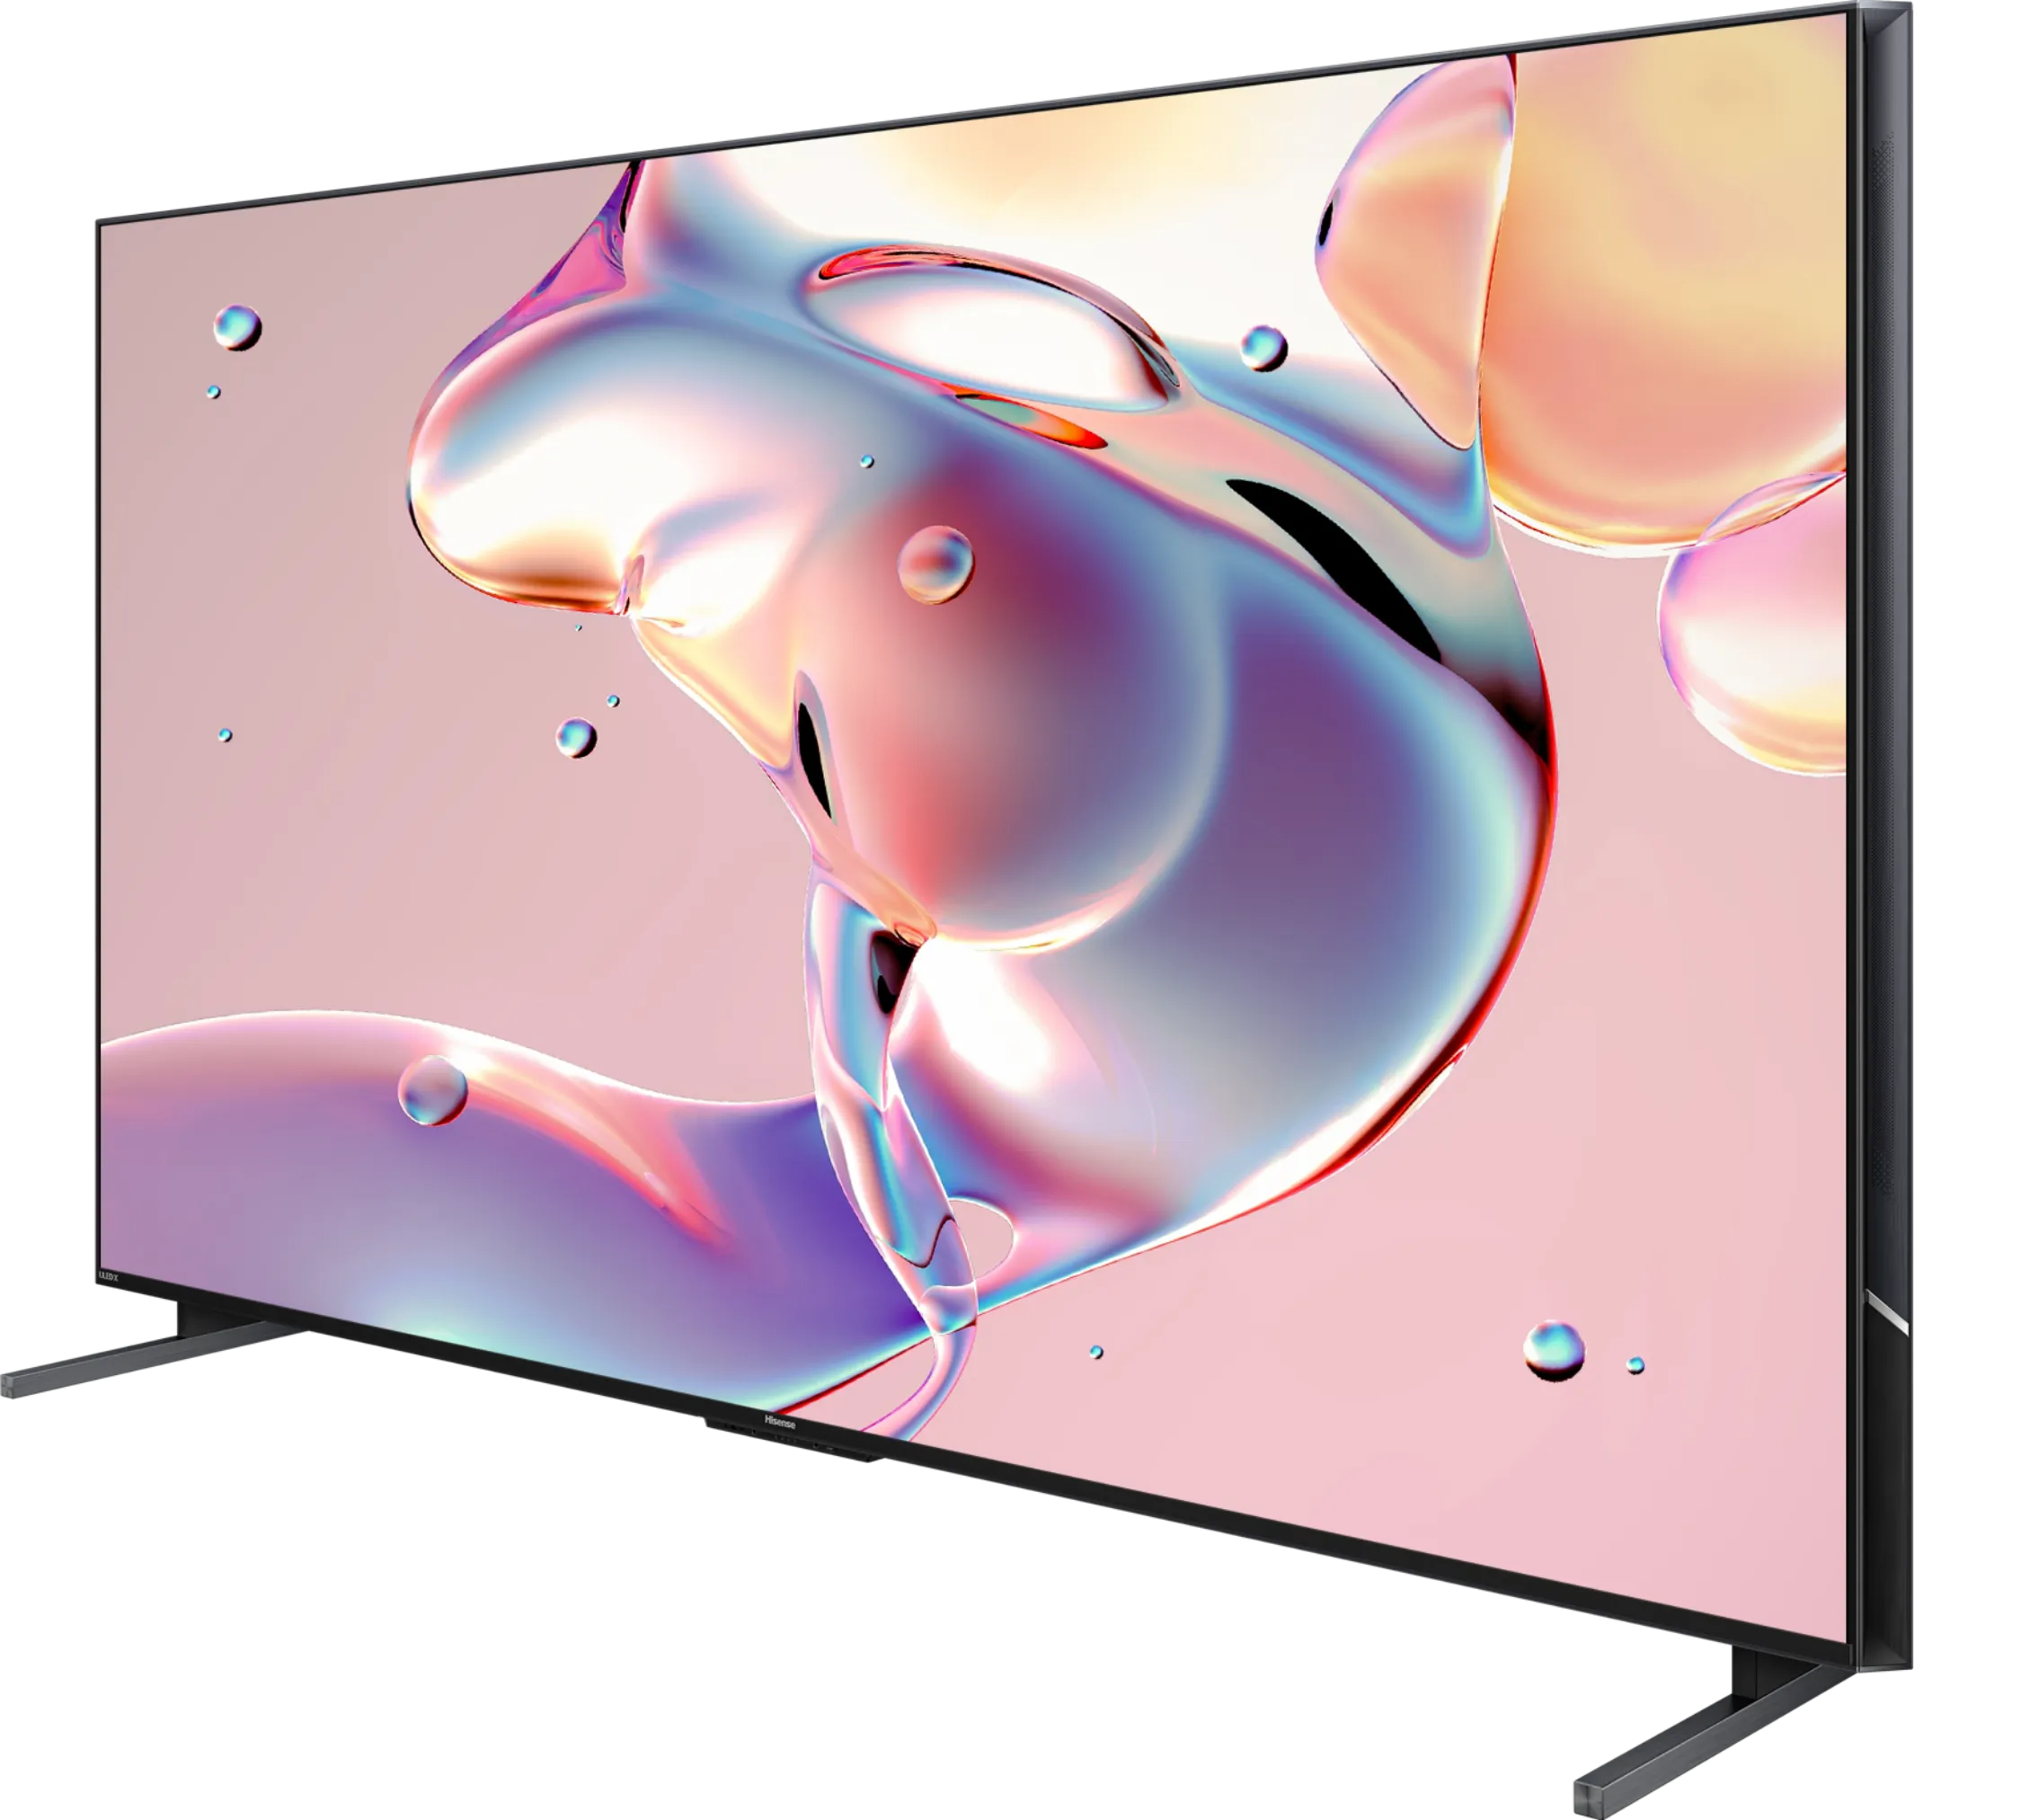 The future is even brighter with the 2023 Hisense UX Series TV